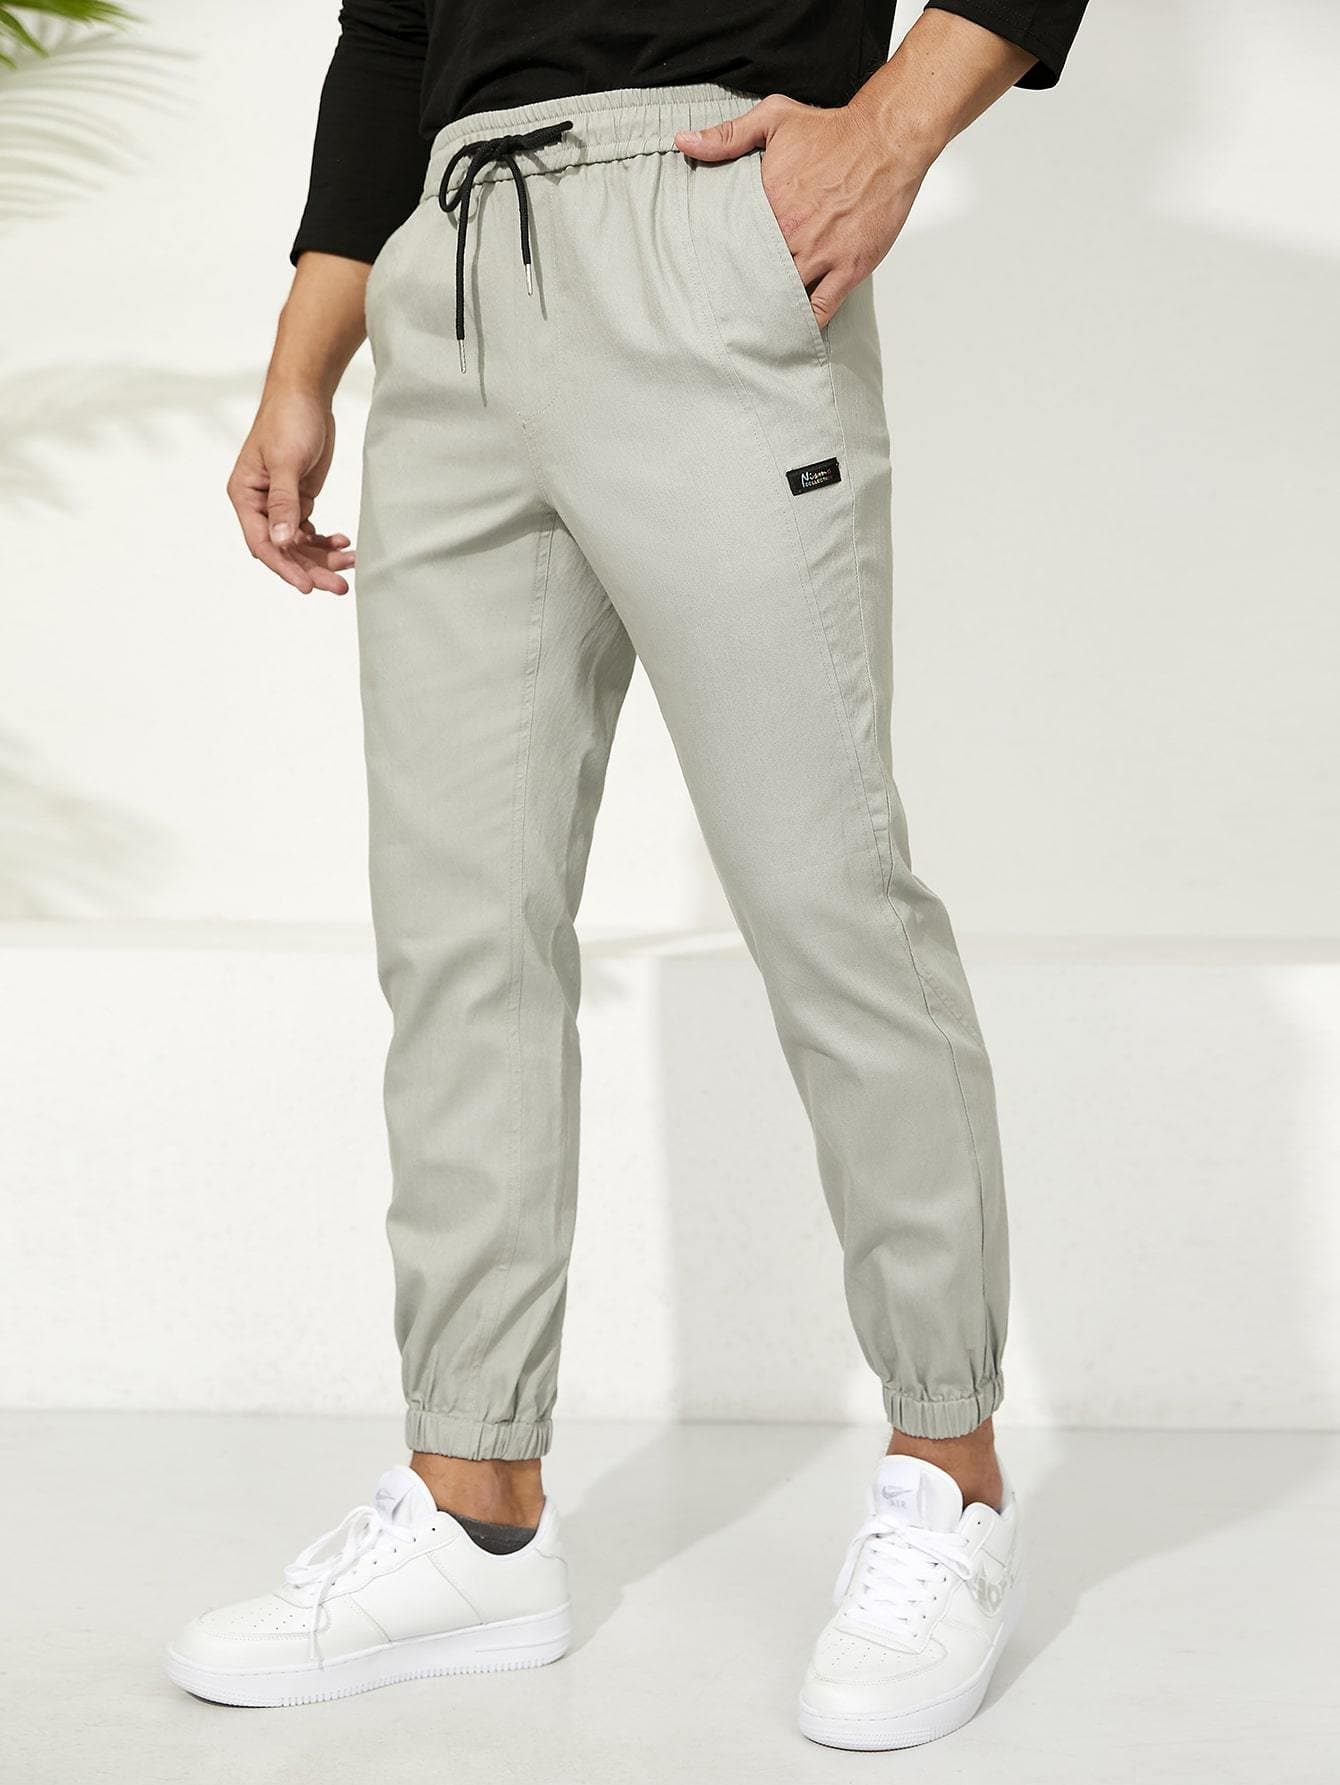 Letter Patched Drawstring Waist Tapered Pants